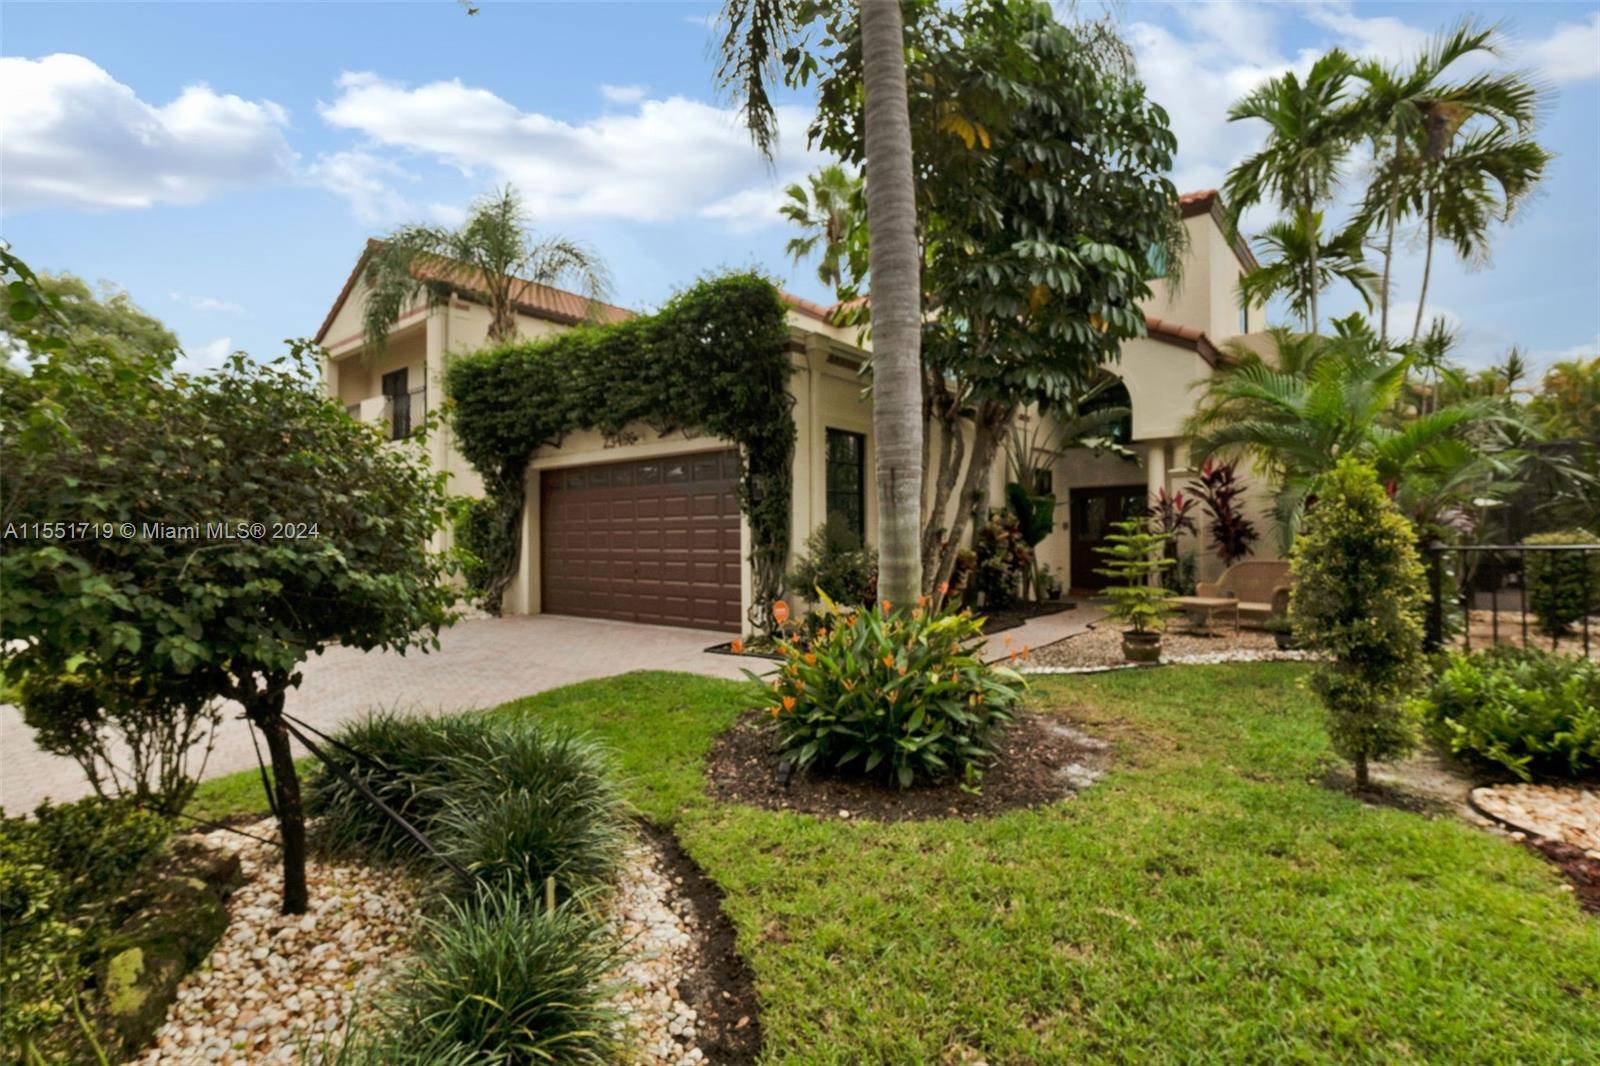 MAGAZINE WORTHY AND STUNNINGLY RENOVATED TWO STORY HOME IN PRESTIGIOUS VALENCIA, BOCA POINT GATED COMMUNITY.